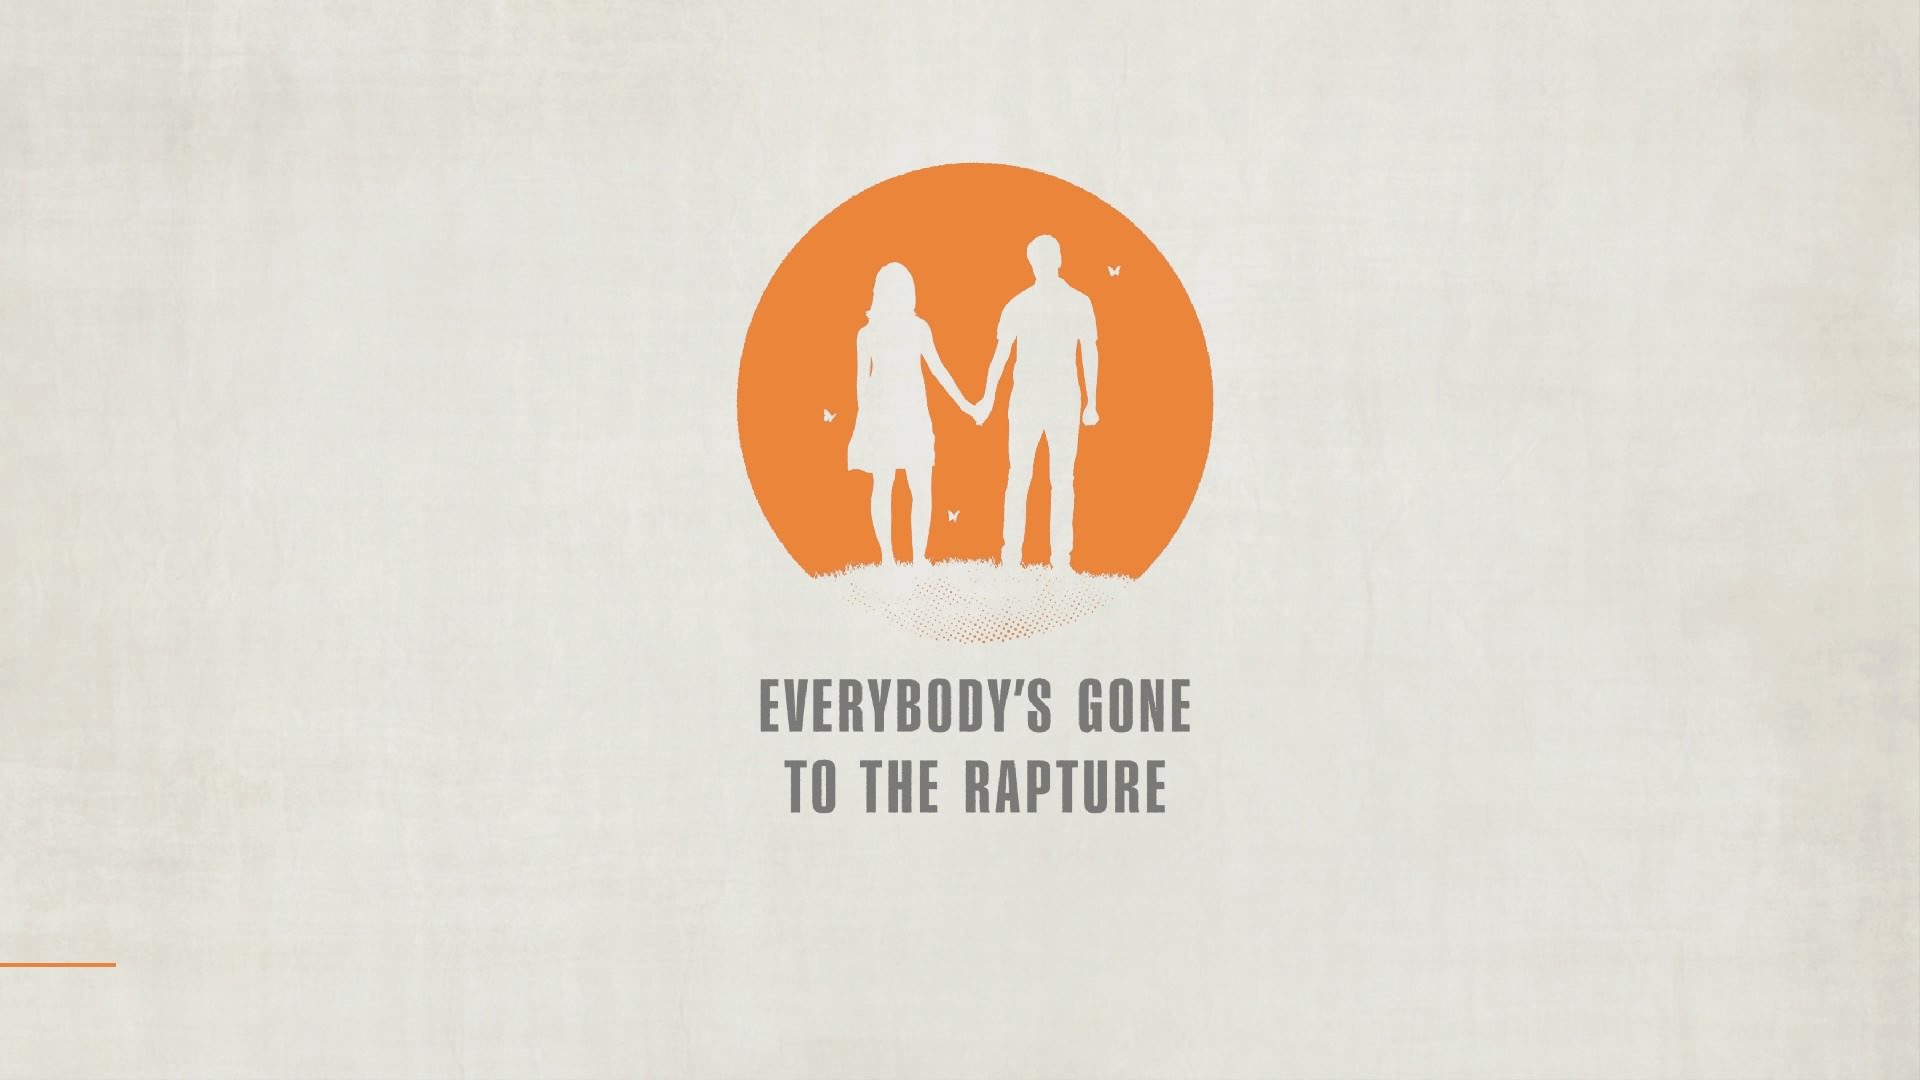 In everyone s life. Everybody’s gone to the Rapture. Everybody's gone to the Rapture (2015). Everybody's gone to the Rapture логотип. Everybody going to the Rapture.